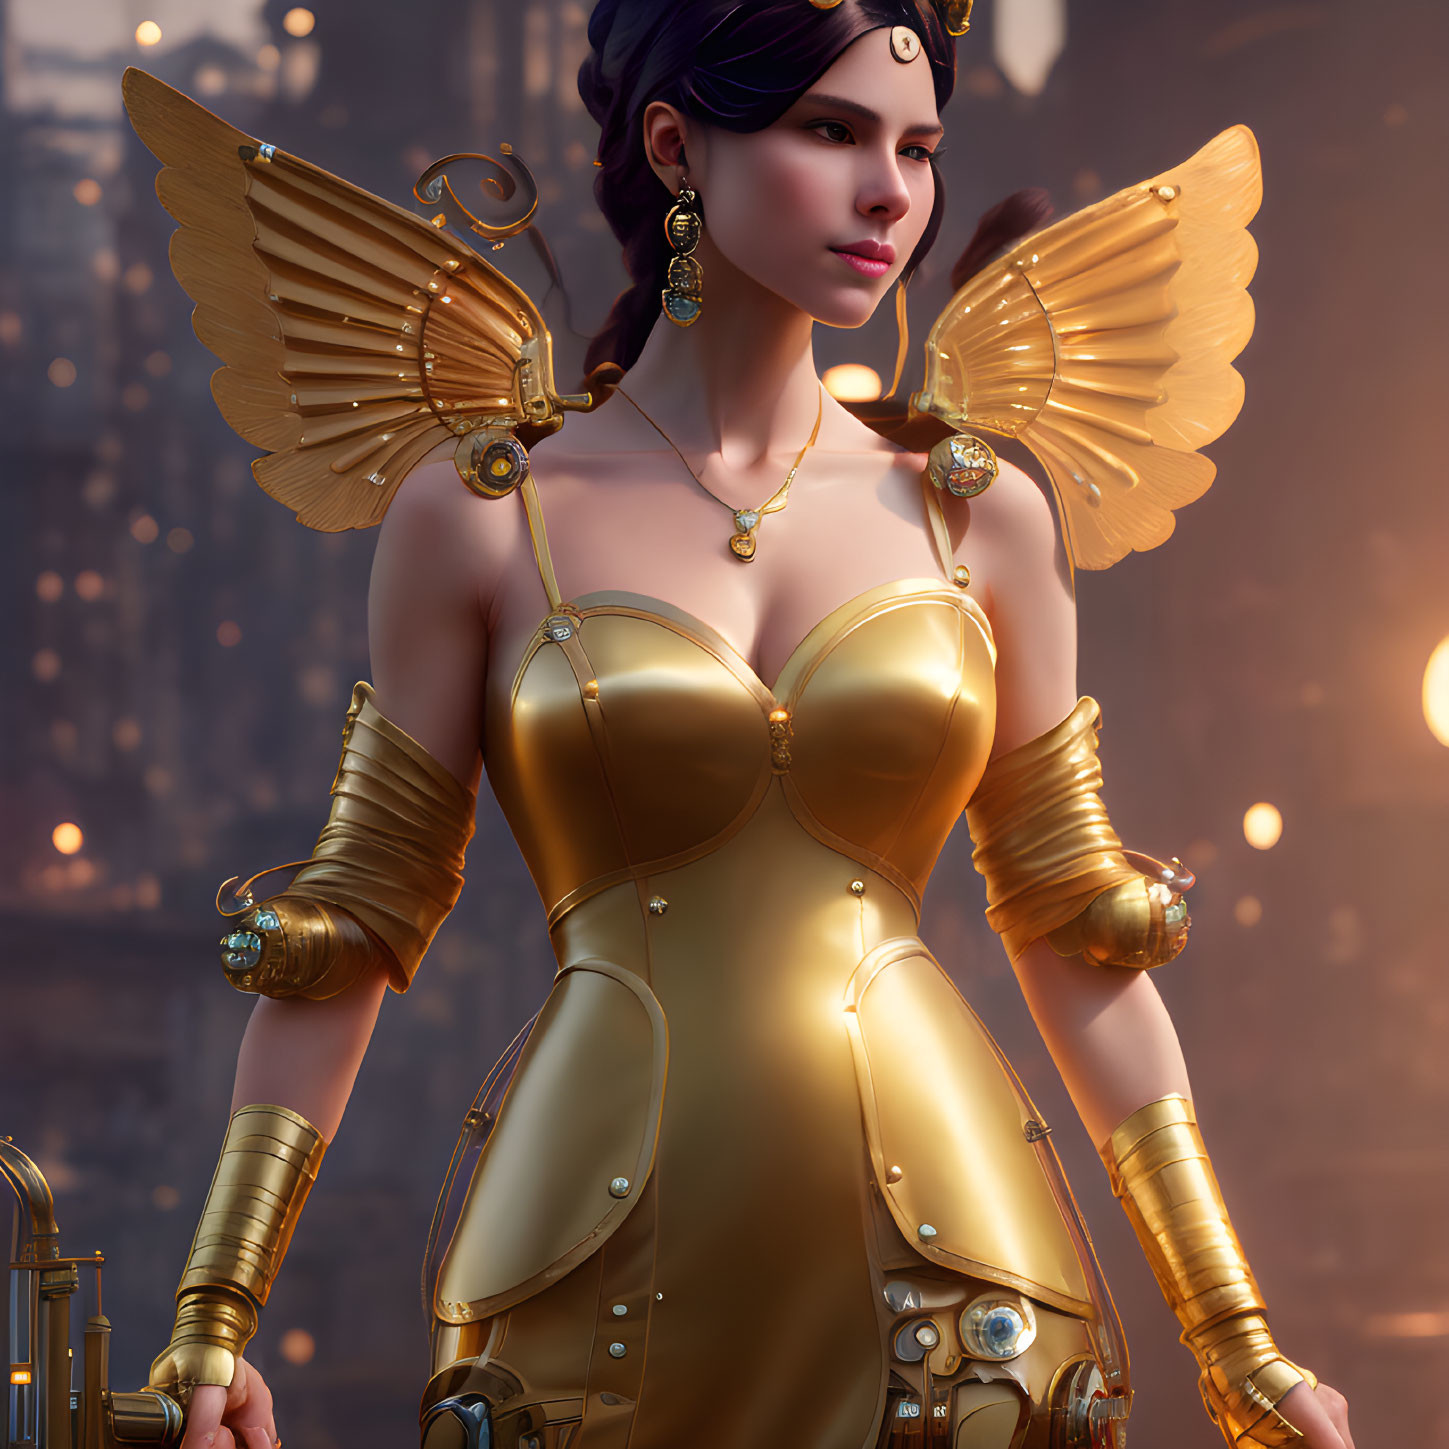 Digital Artwork: Woman with Mechanical Wings and Golden Armor in Cityscape at Twilight